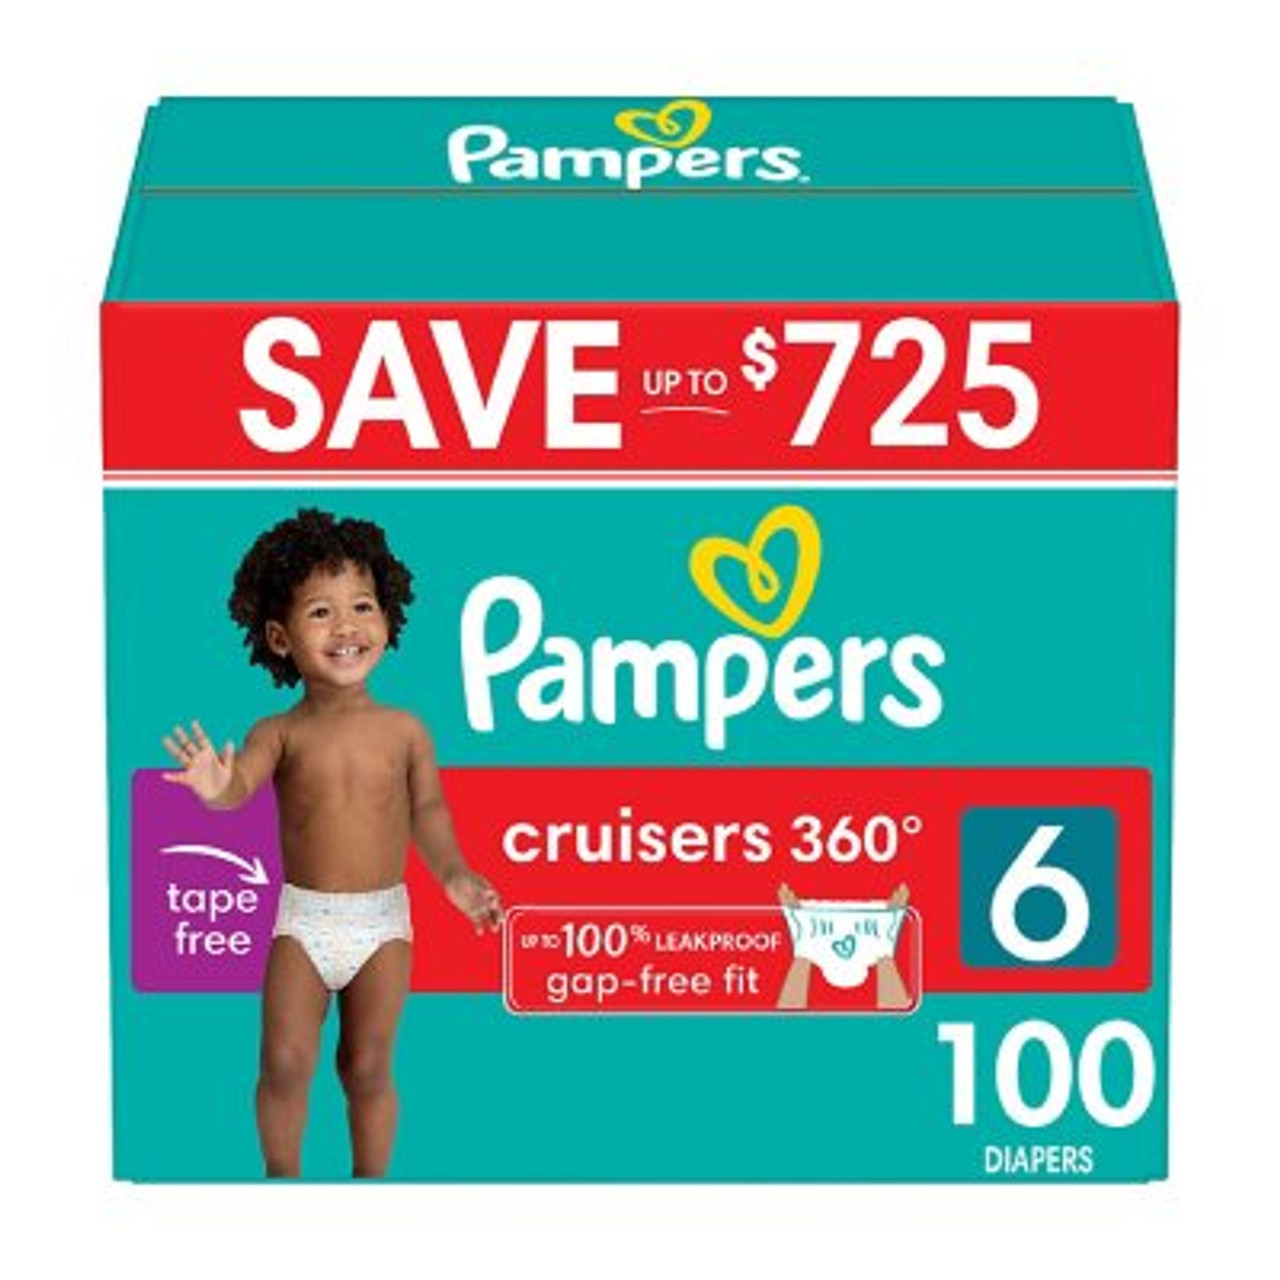 Pampers Cruisers 360 Diapers Gap-Free Fit Size 6 - 100 ct. (35+ lbs.) - *Pre-Order